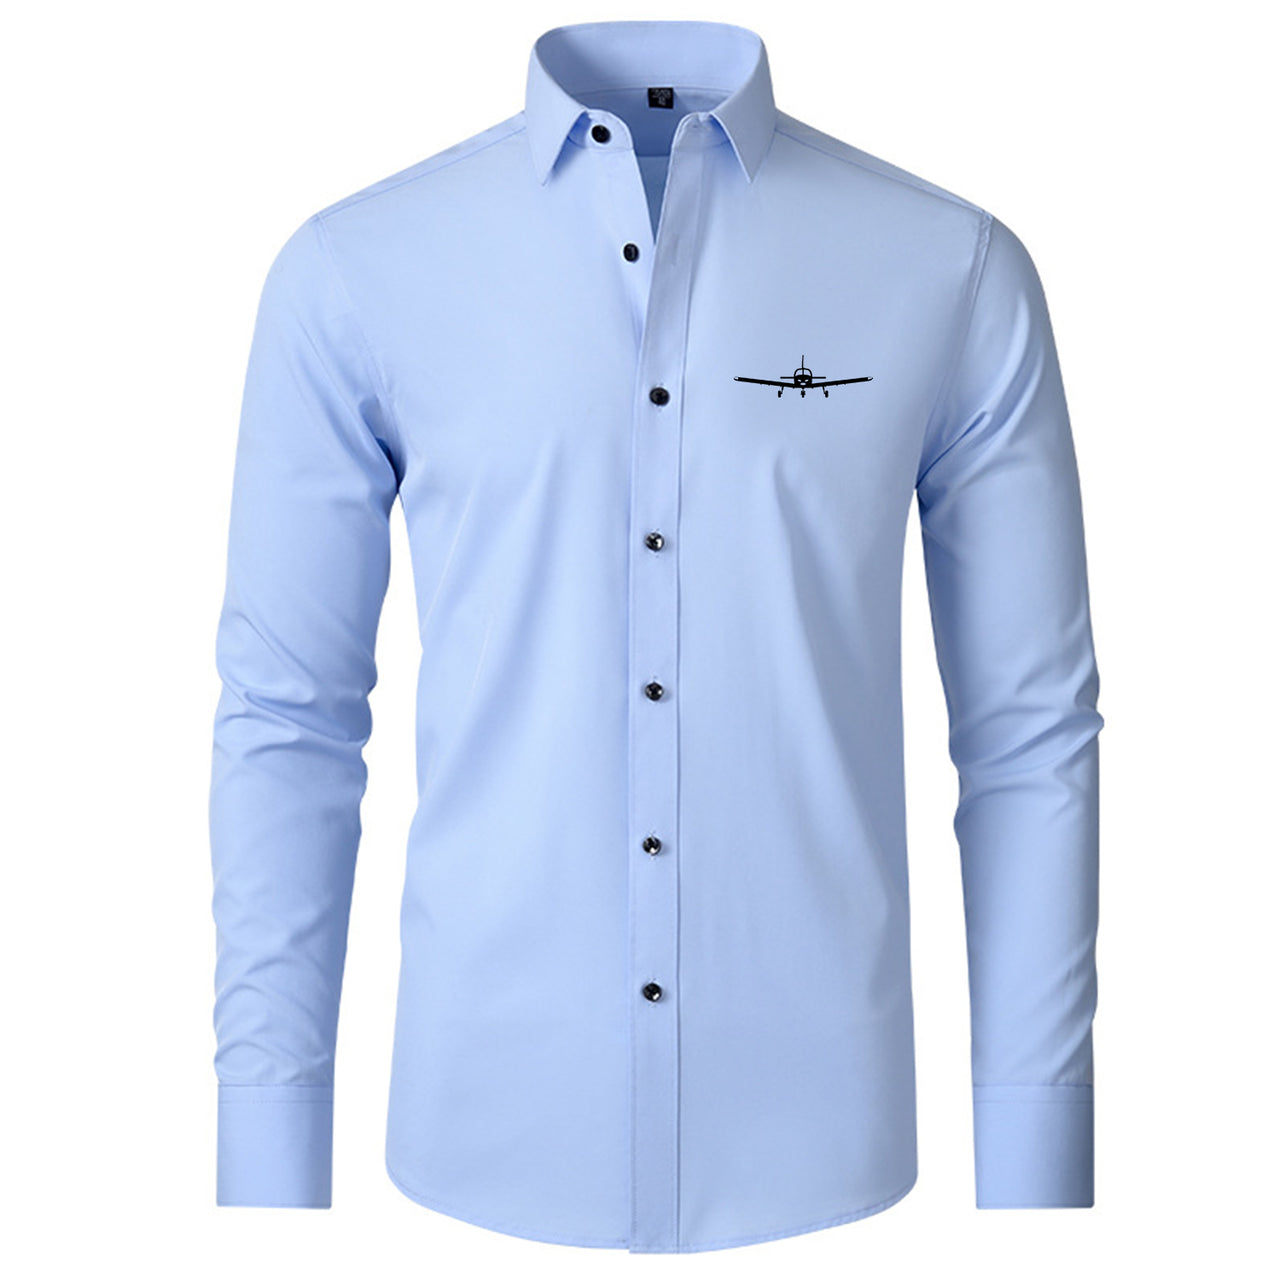 Piper PA28 Silhouette Plane Designed Long Sleeve Shirts